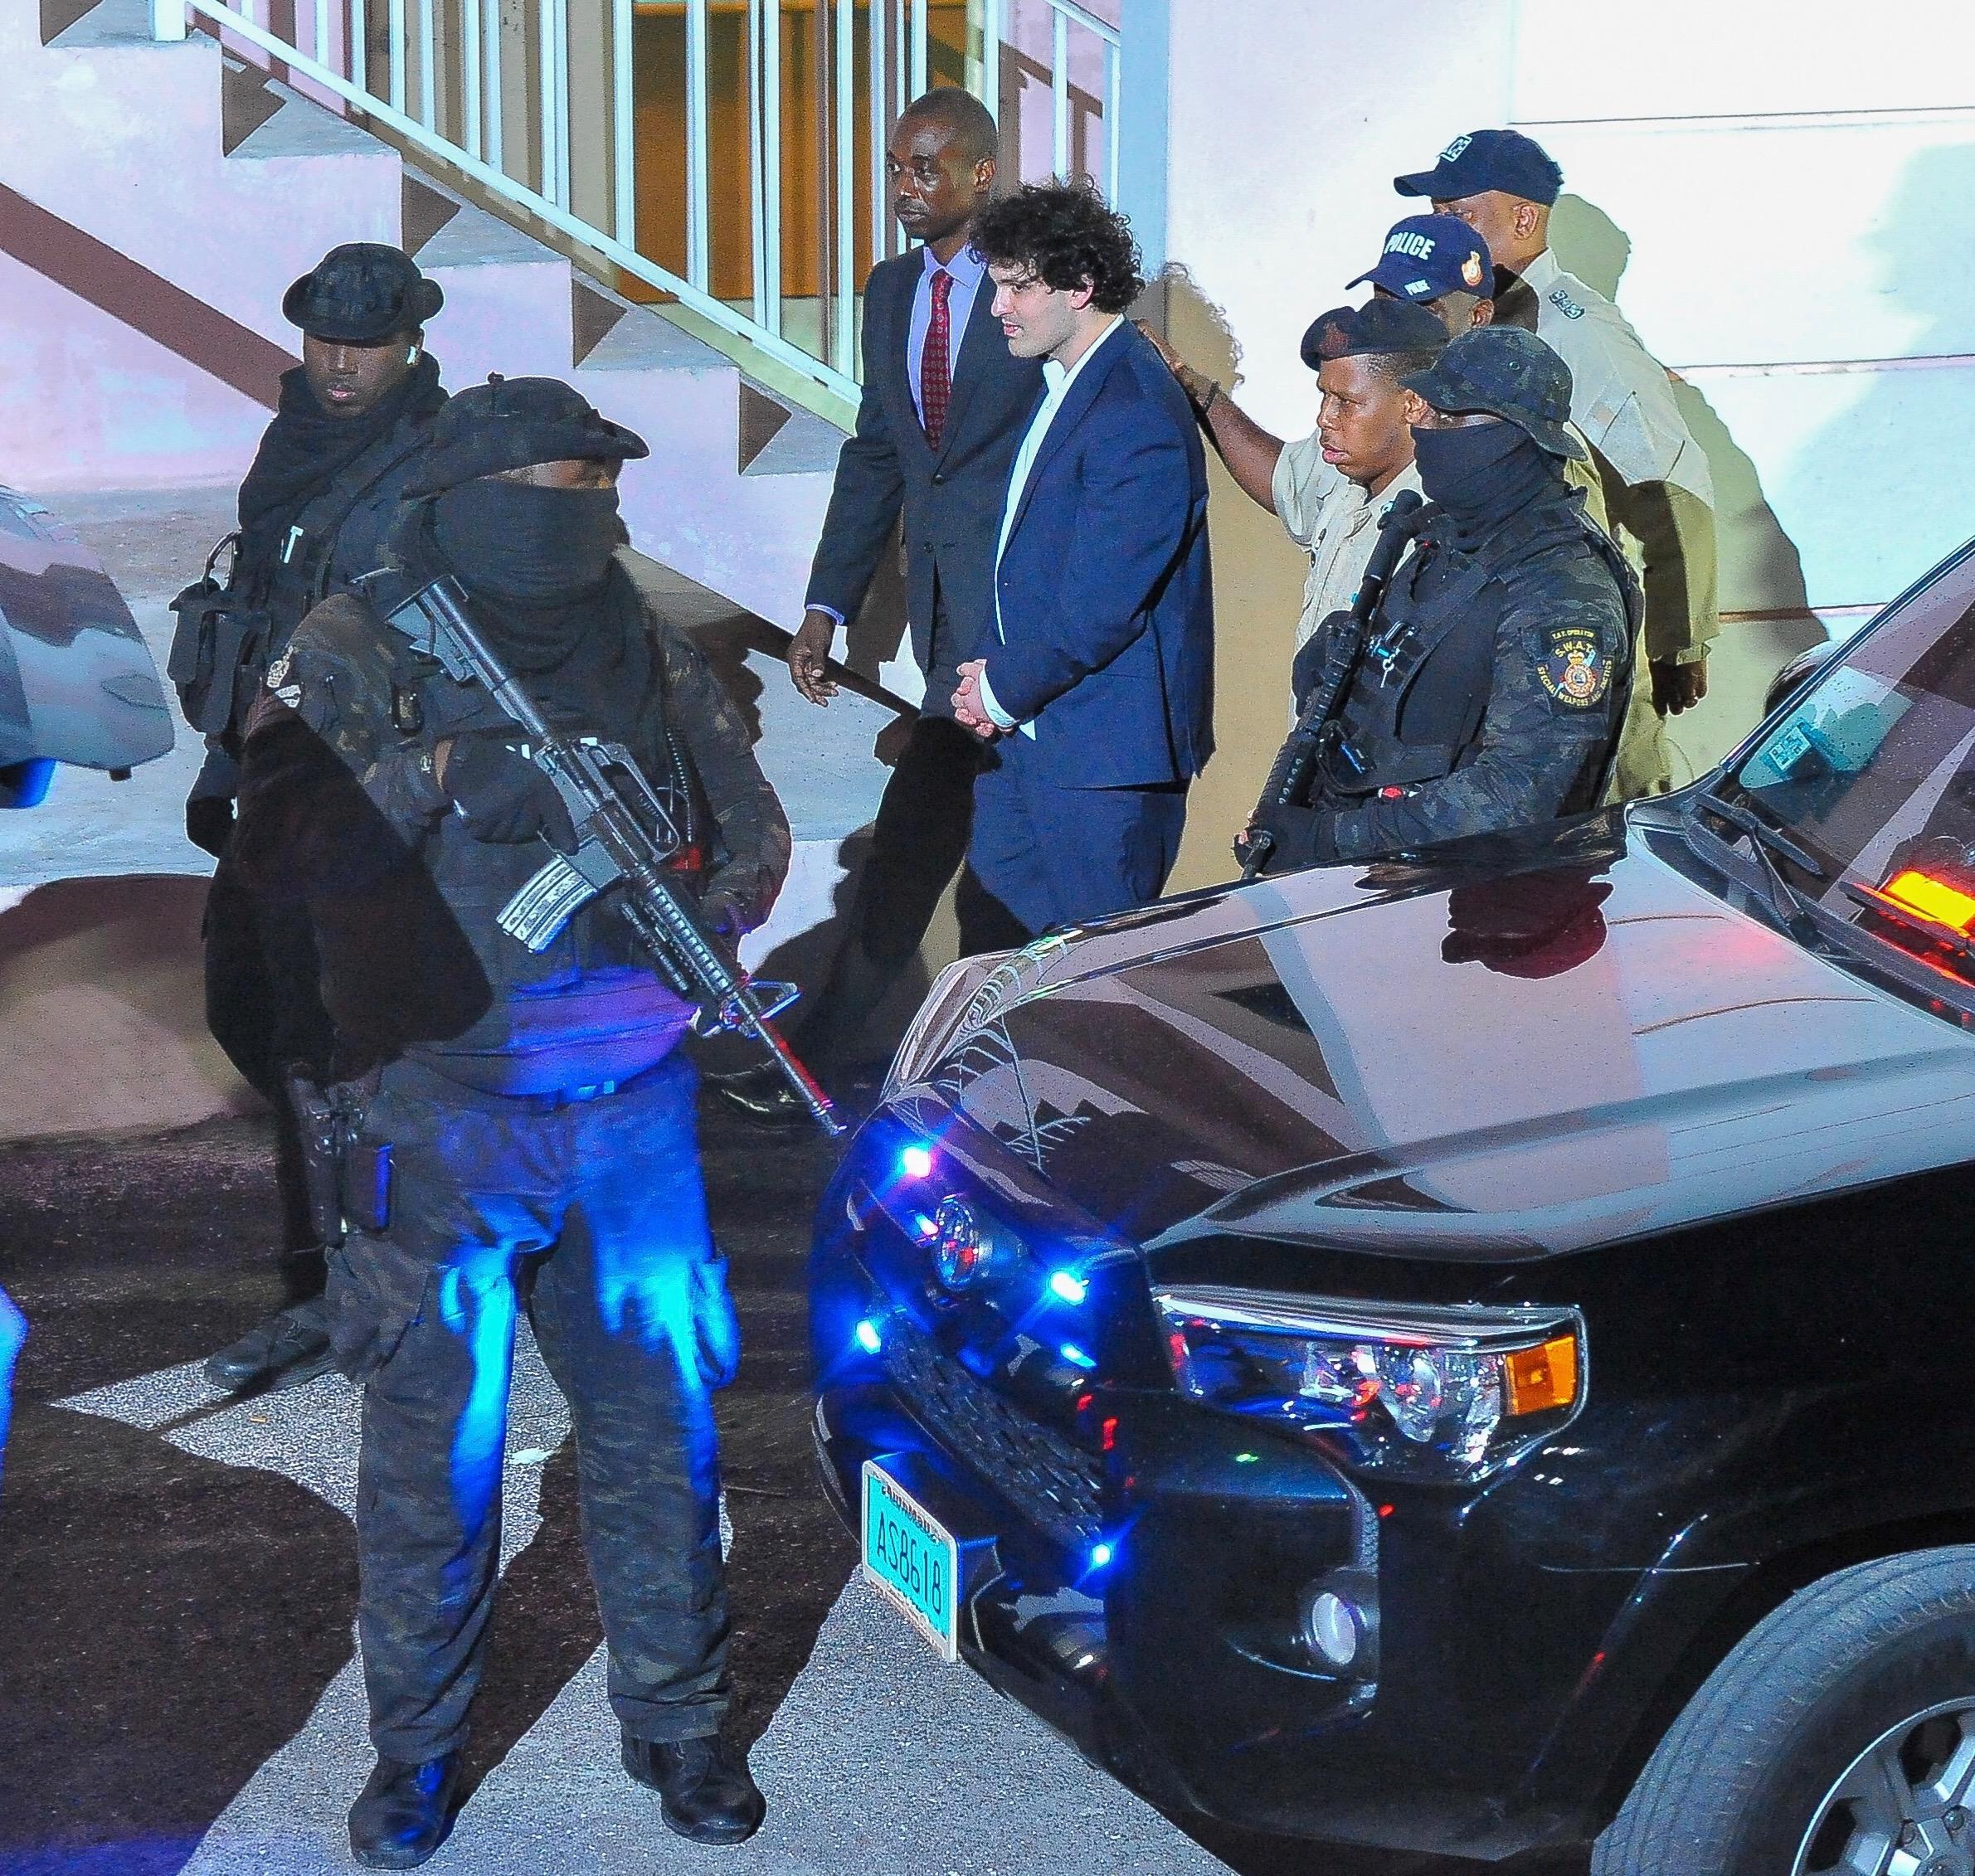 FTX founder Sam Bankman-Fried is seen in handcuffs as he leaves a court in the Bahamas after U S files criminal charges